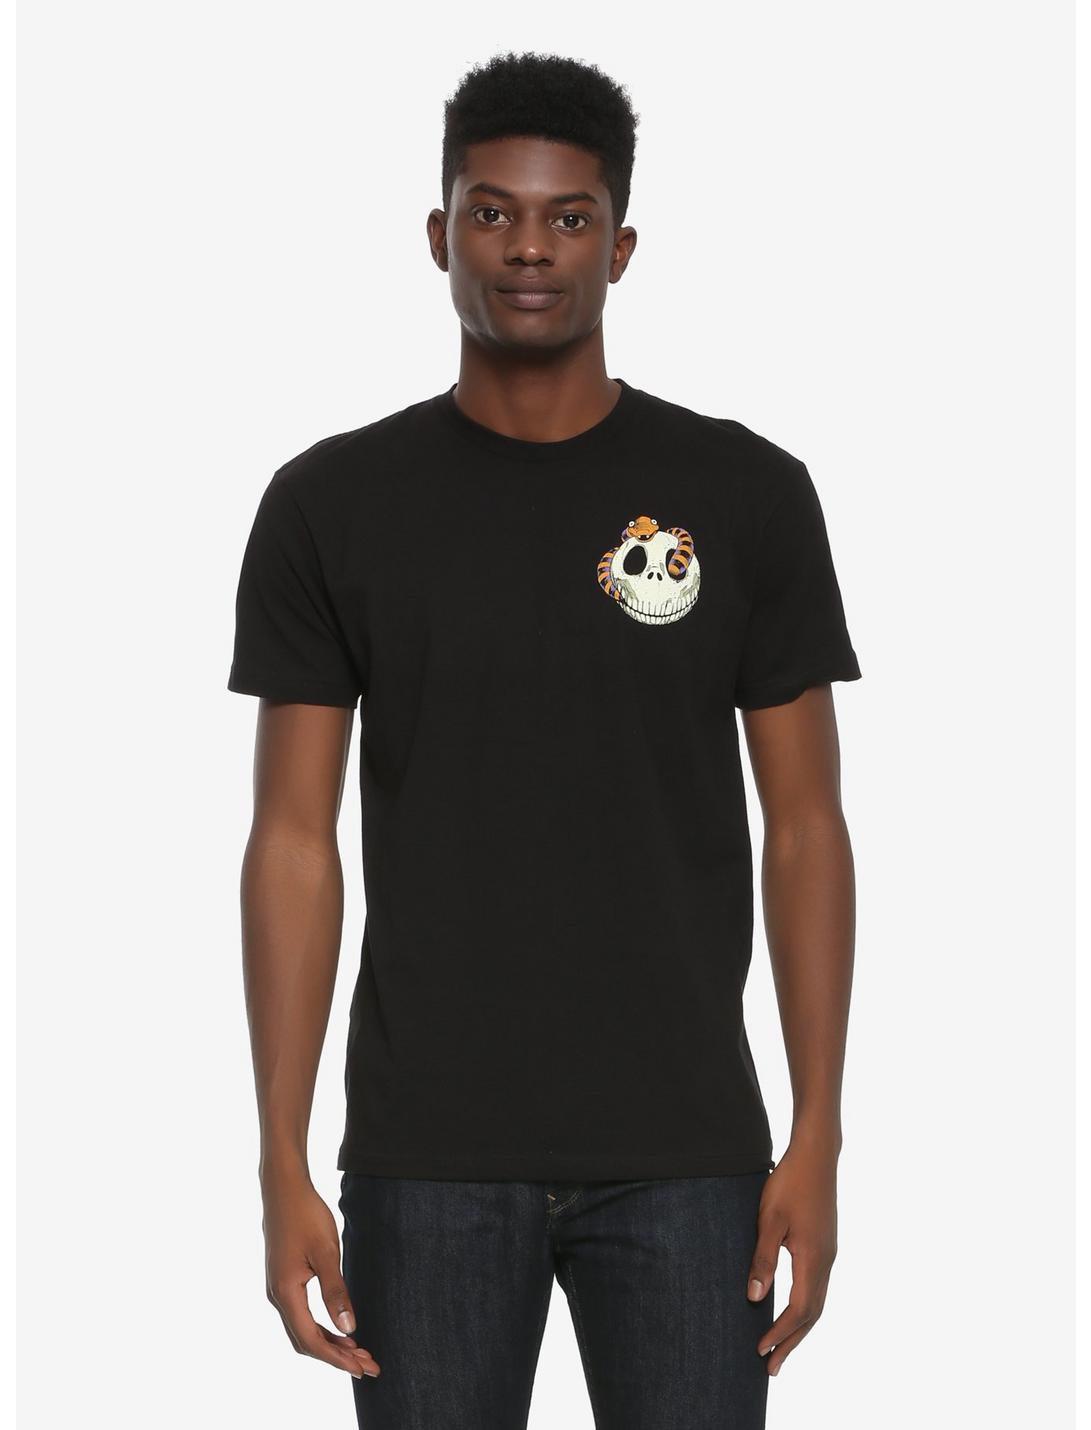 The Nightmare Before Christmas All Hail T-Shirt - BoxLunch Exclusive, BLACK, hi-res